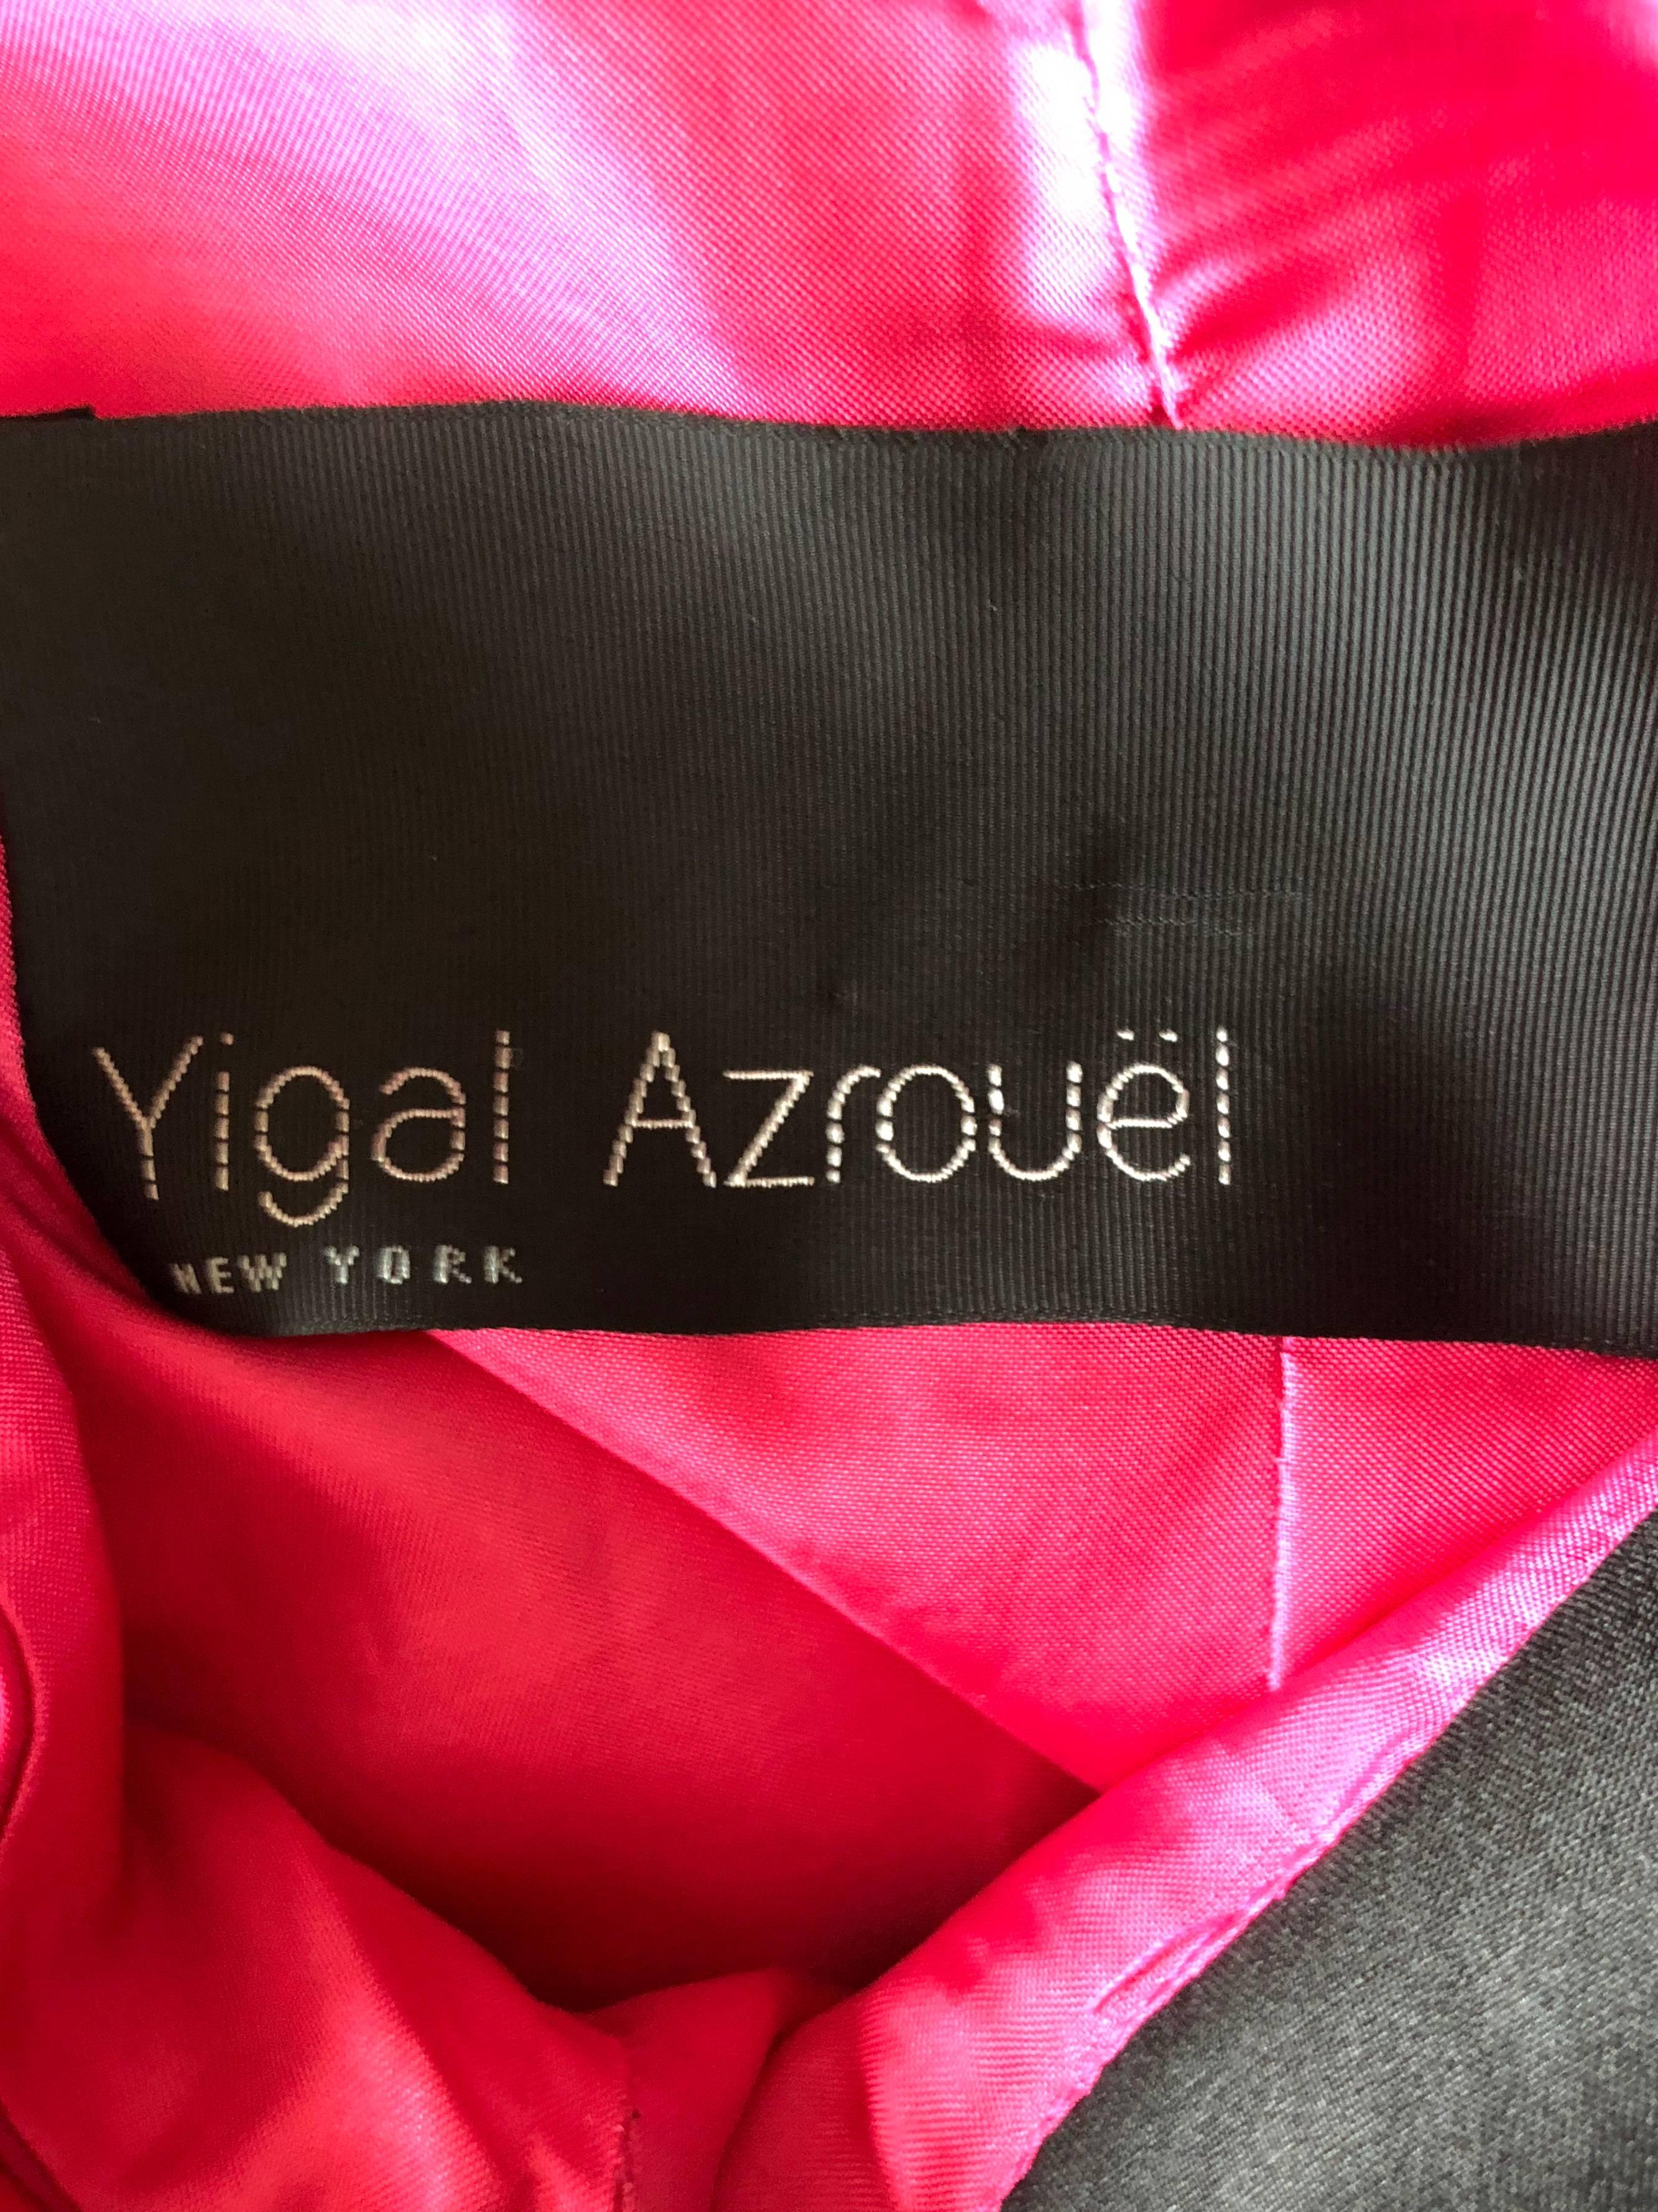 Sexy YIGAL AZROUEL hot pink / fuchsia and black color block shift dress! Features an open back that reveals just the right amount of skin. Pockets at each side of the hips. Hidden zipper up the side with hook-and-eye closure. Great for any day or